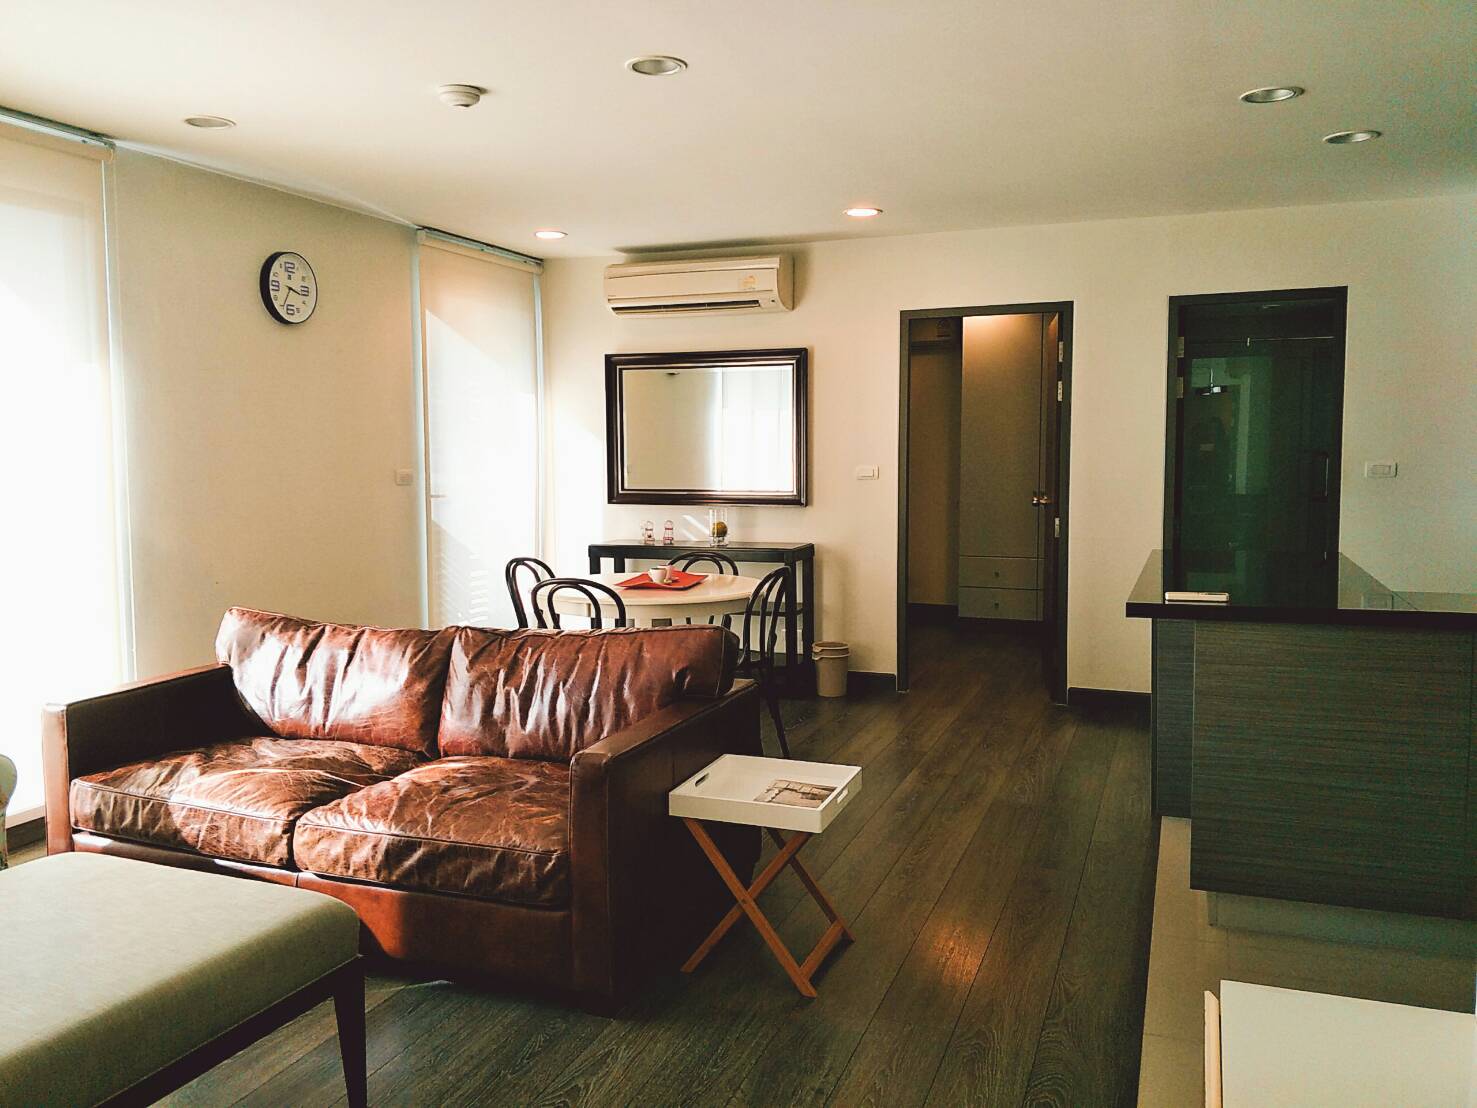 Apartment 2 bedroom for rent in Asoke - Low Rise Condo - Rende 23